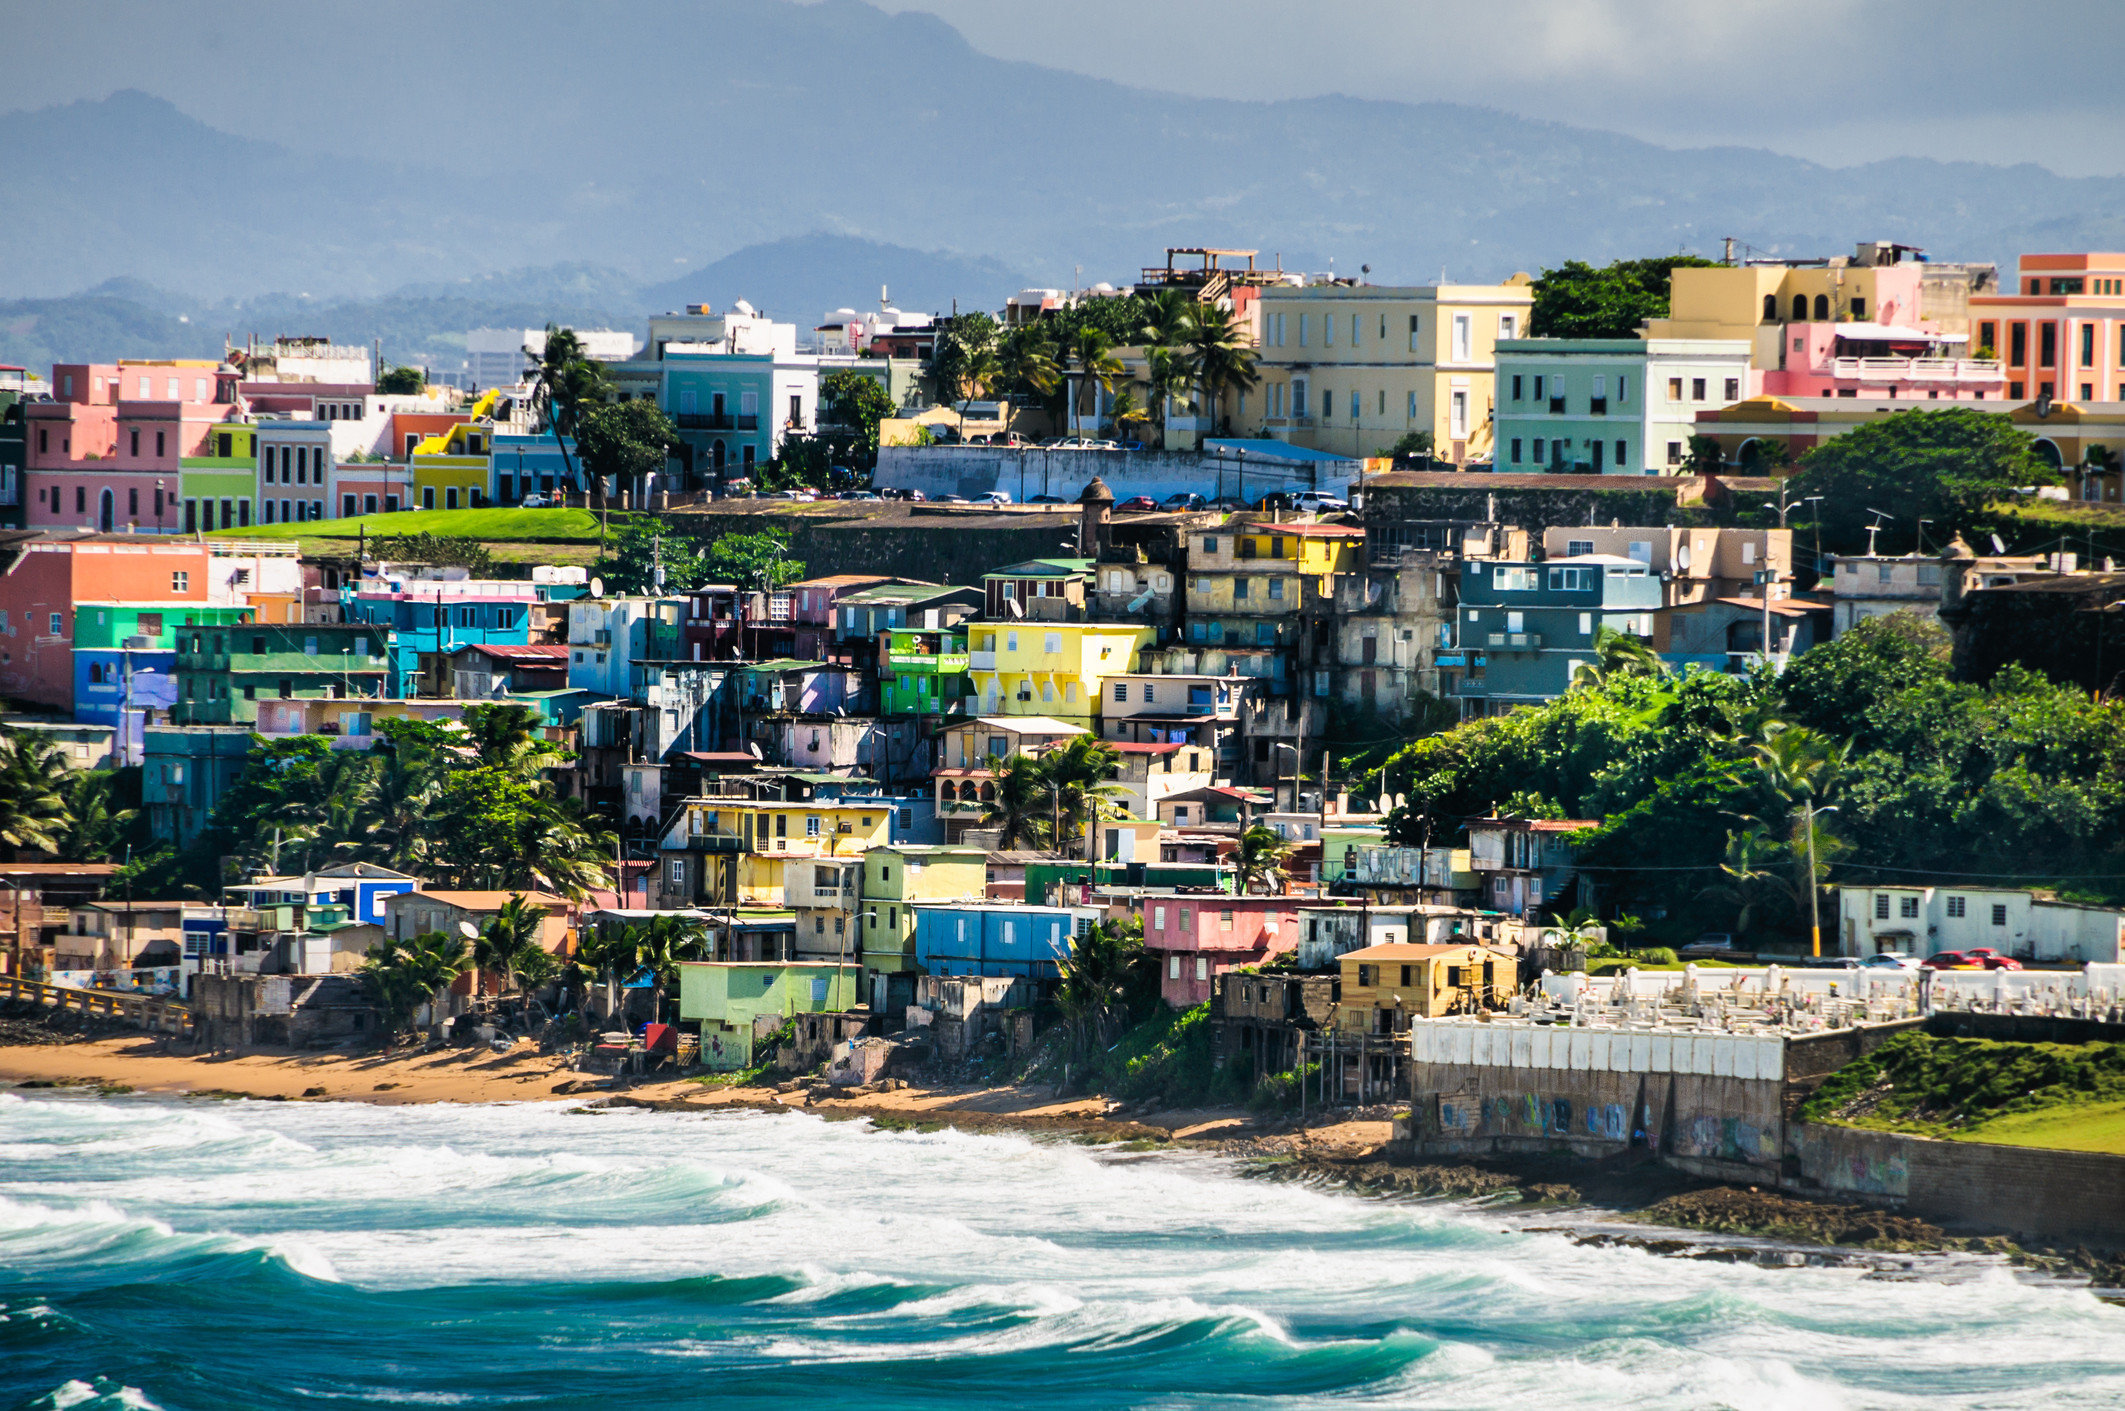 13 Things to Do in San Juan, Puerto Rico Our Ultimate Travel Guide